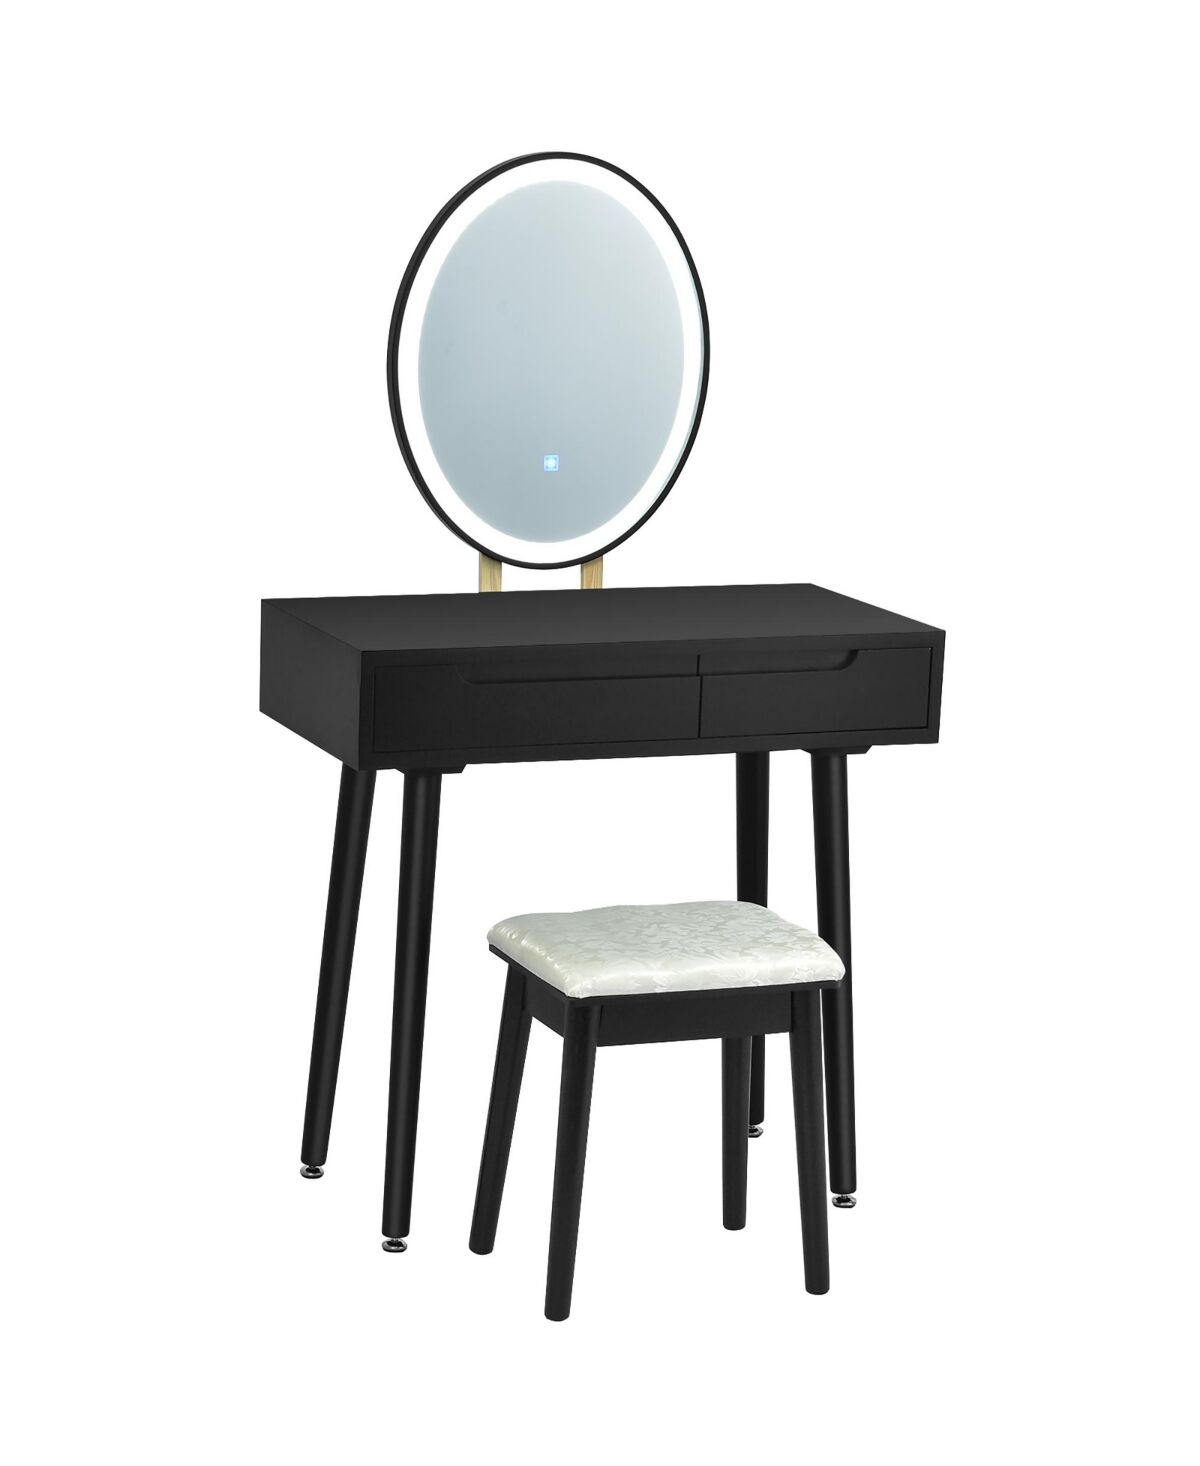 Costway Vanity Makeup Table Touch Screen Dressing Table Stool Set - Black